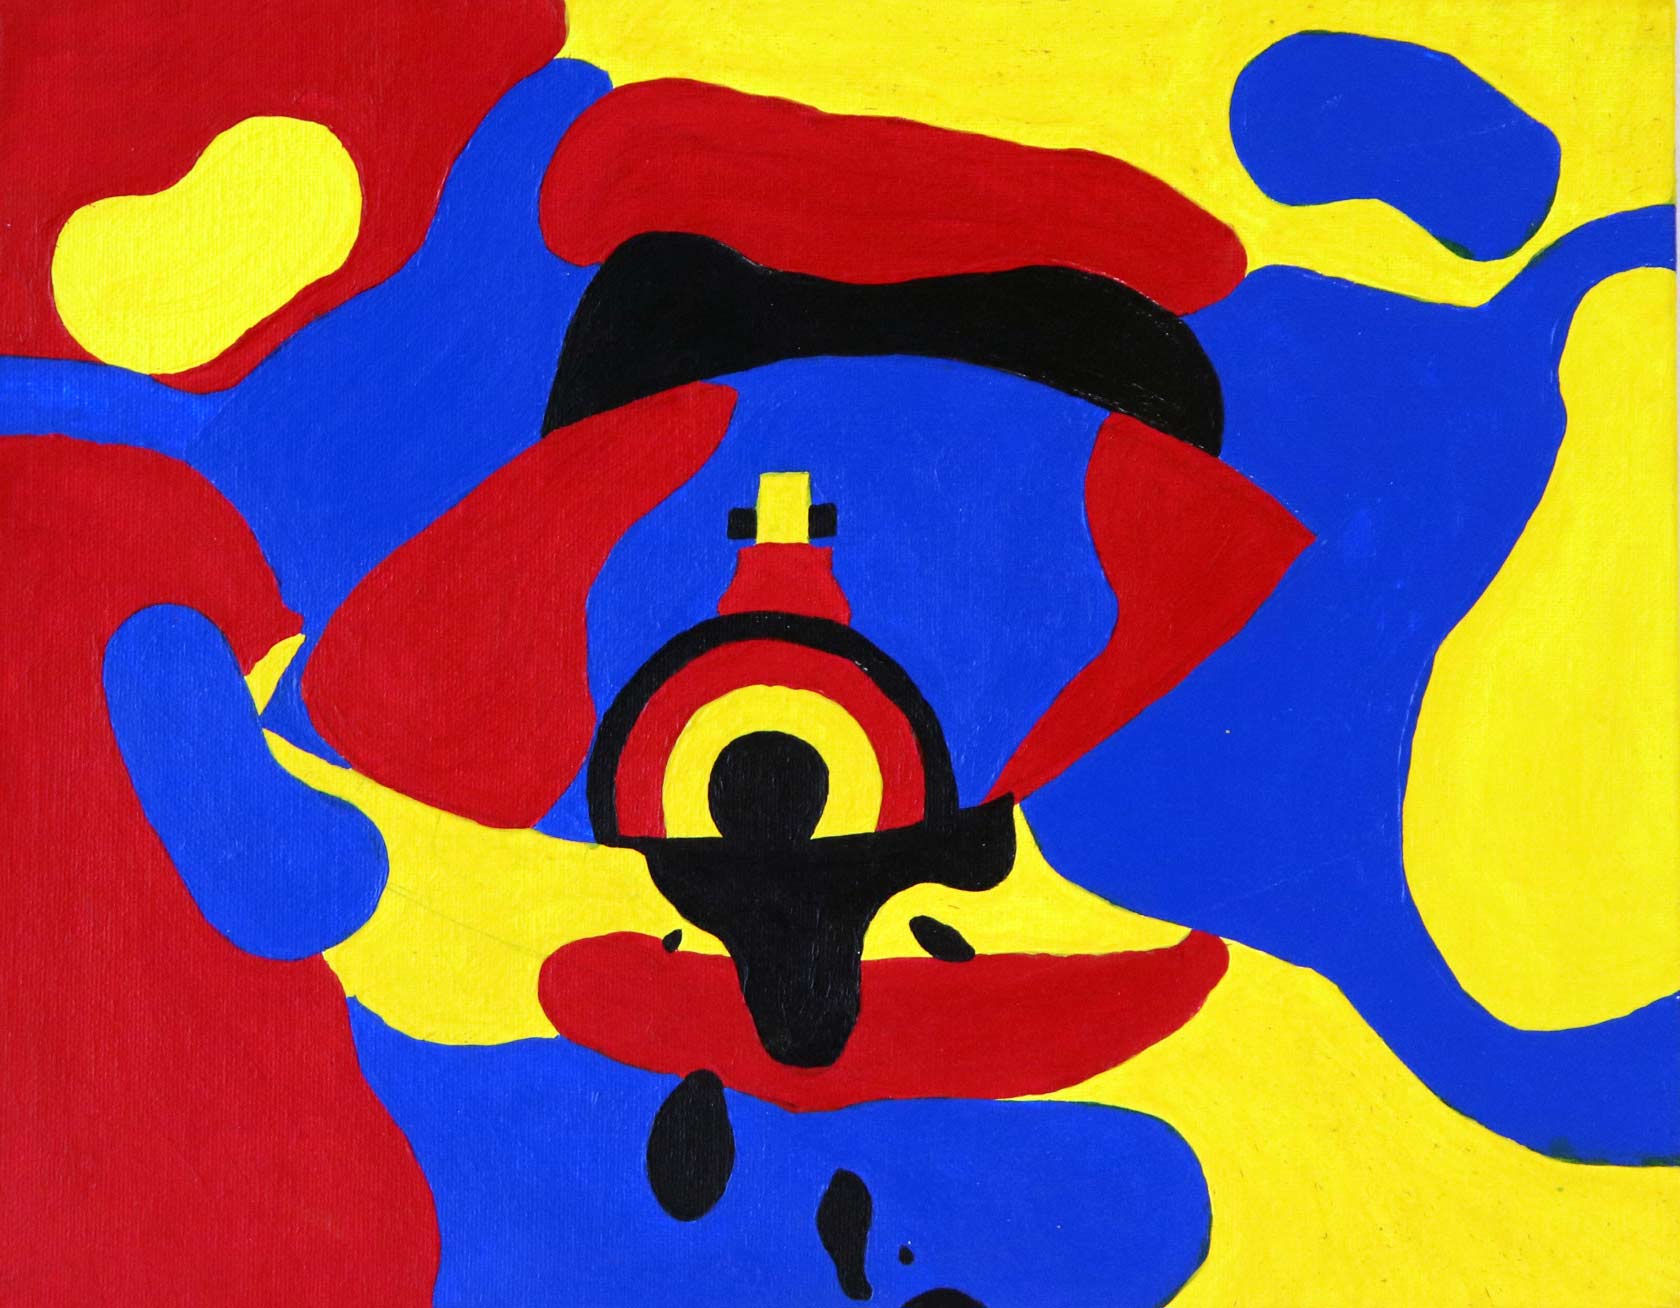 abstract red, blue, yellow and black painting with an abstracted eye